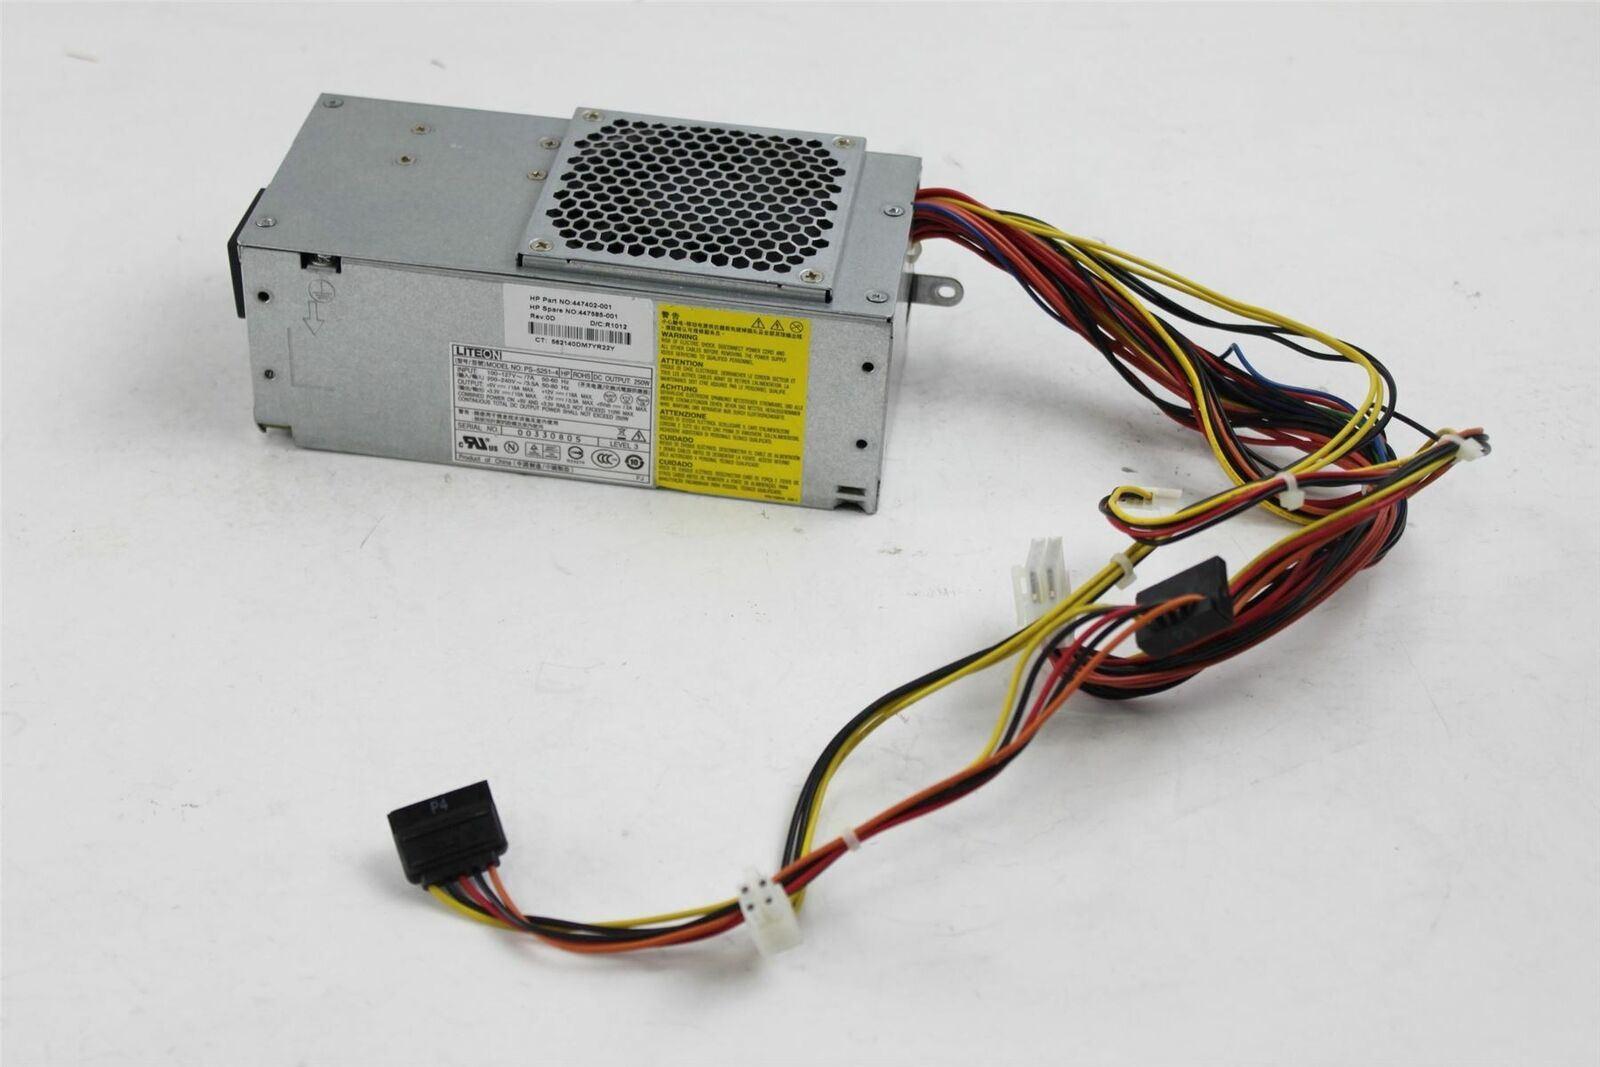 447402 001 PS 5251 4 447585 001 power supply 250 watts 115 230vac input 50 60hz with power factor correction